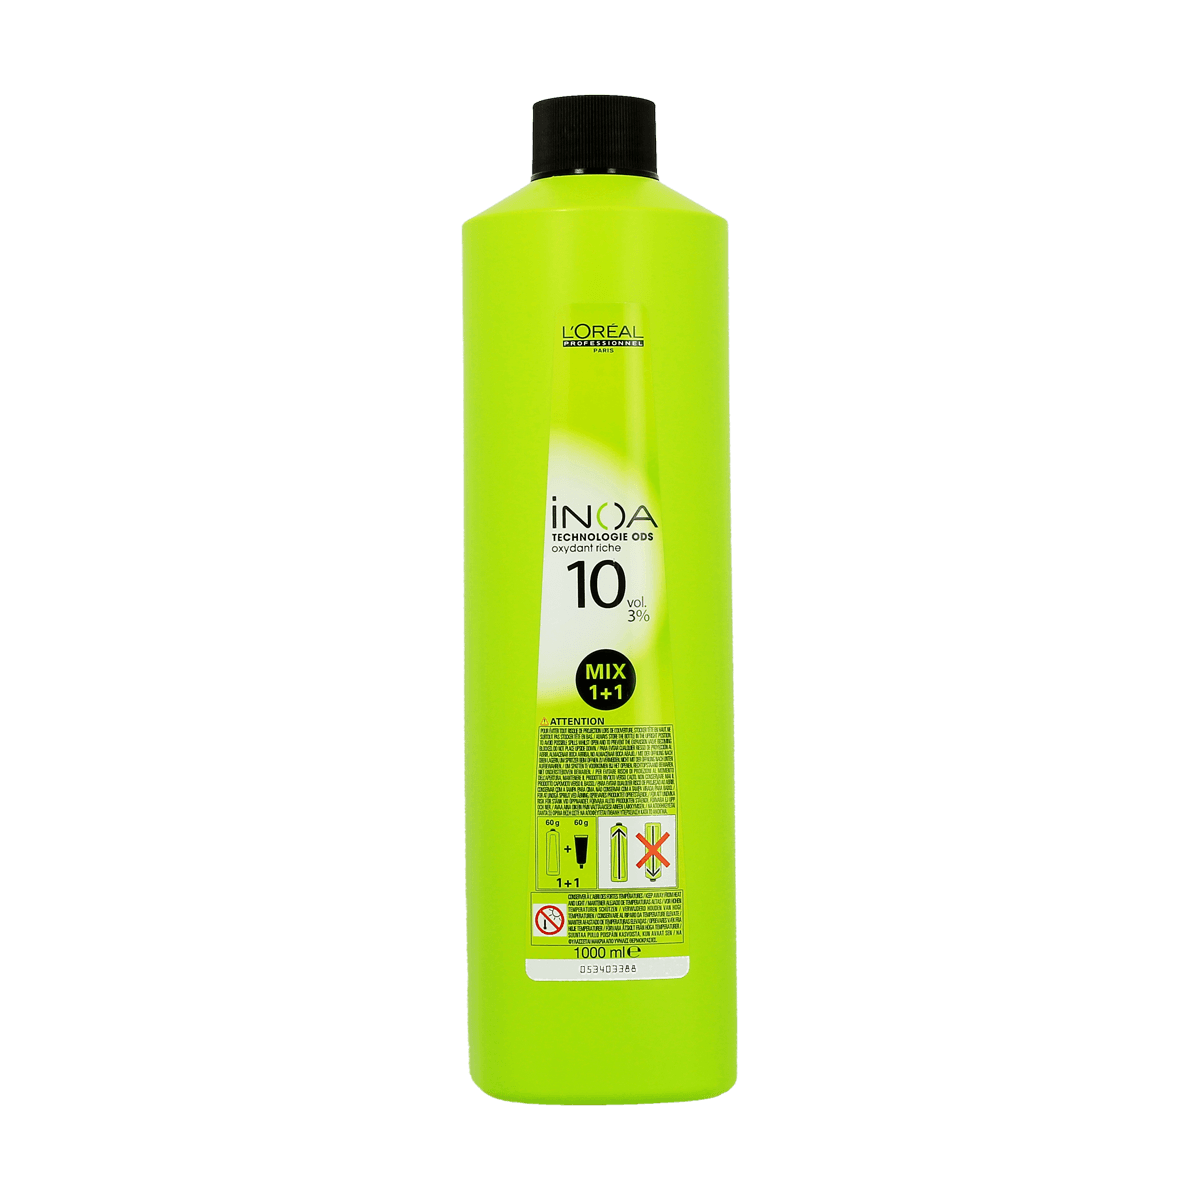  1000ml - Ultimate Hair and Beauty